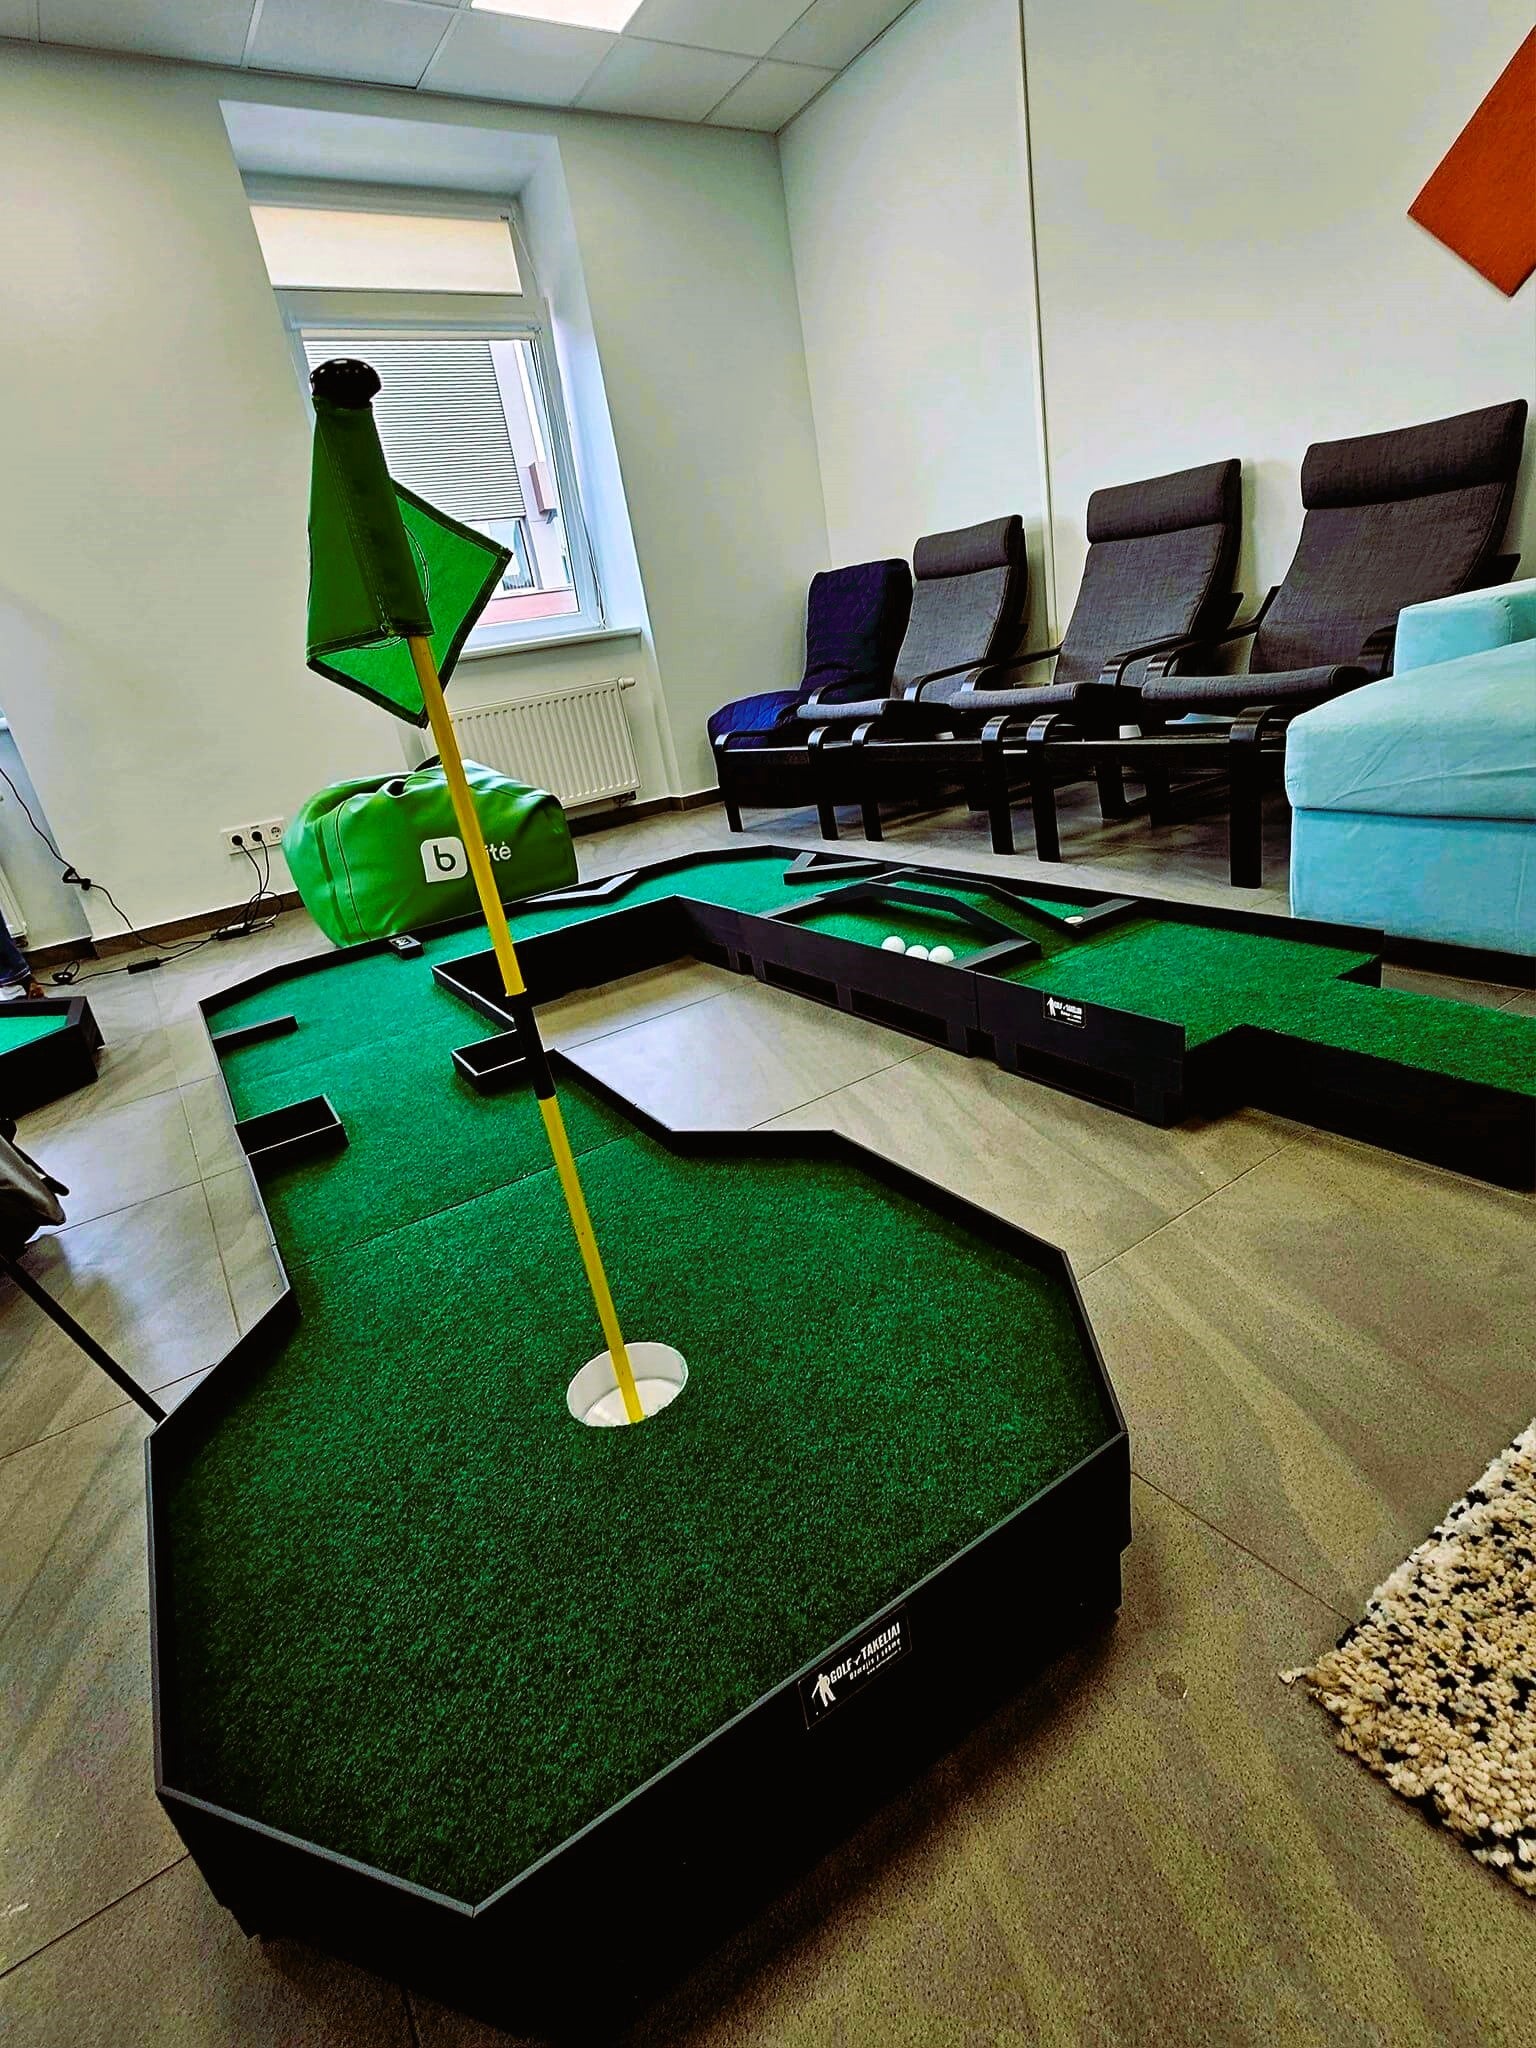 miniature conference golf